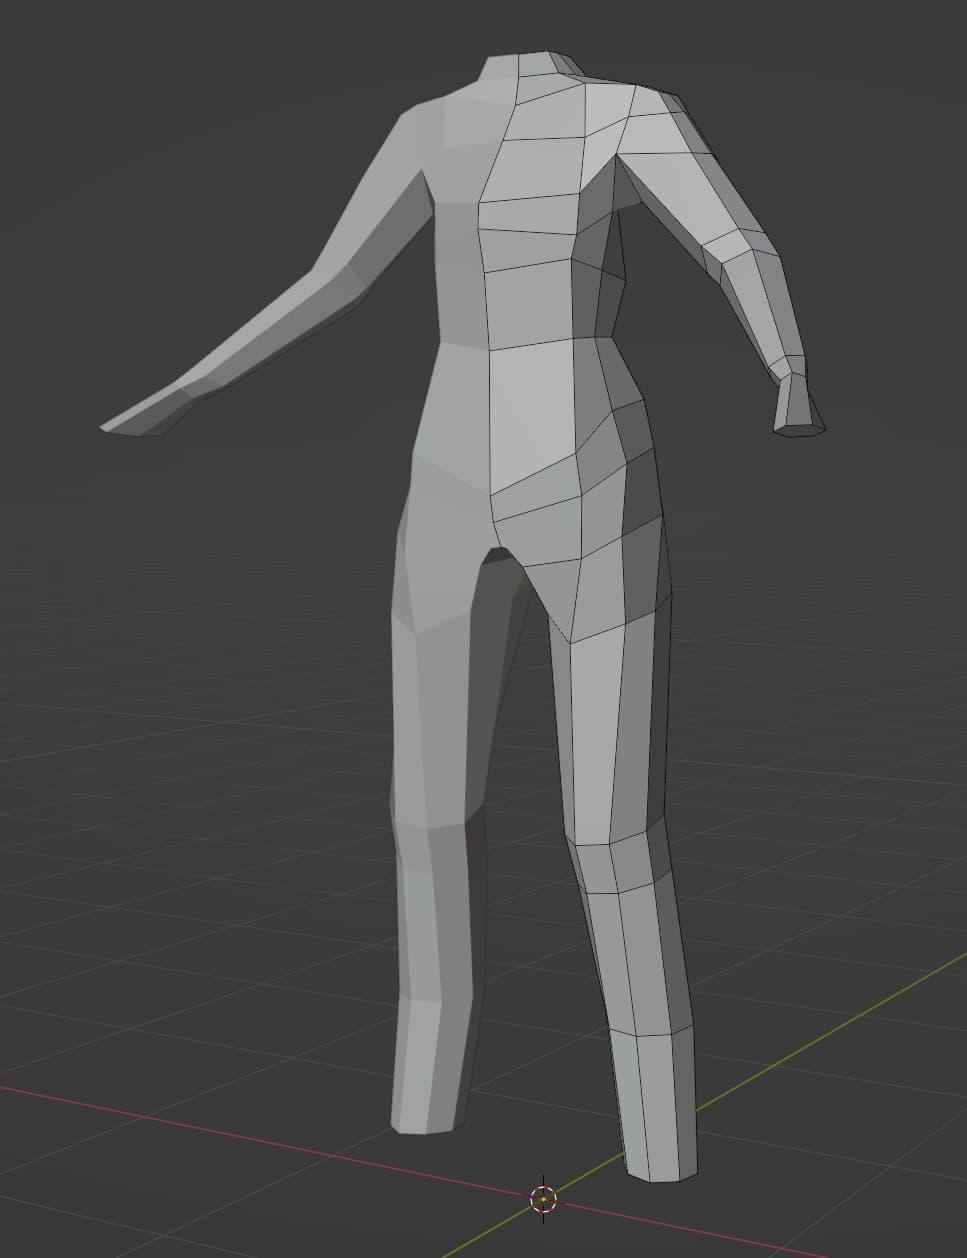 The torso, arms, and legs are now attached into one model